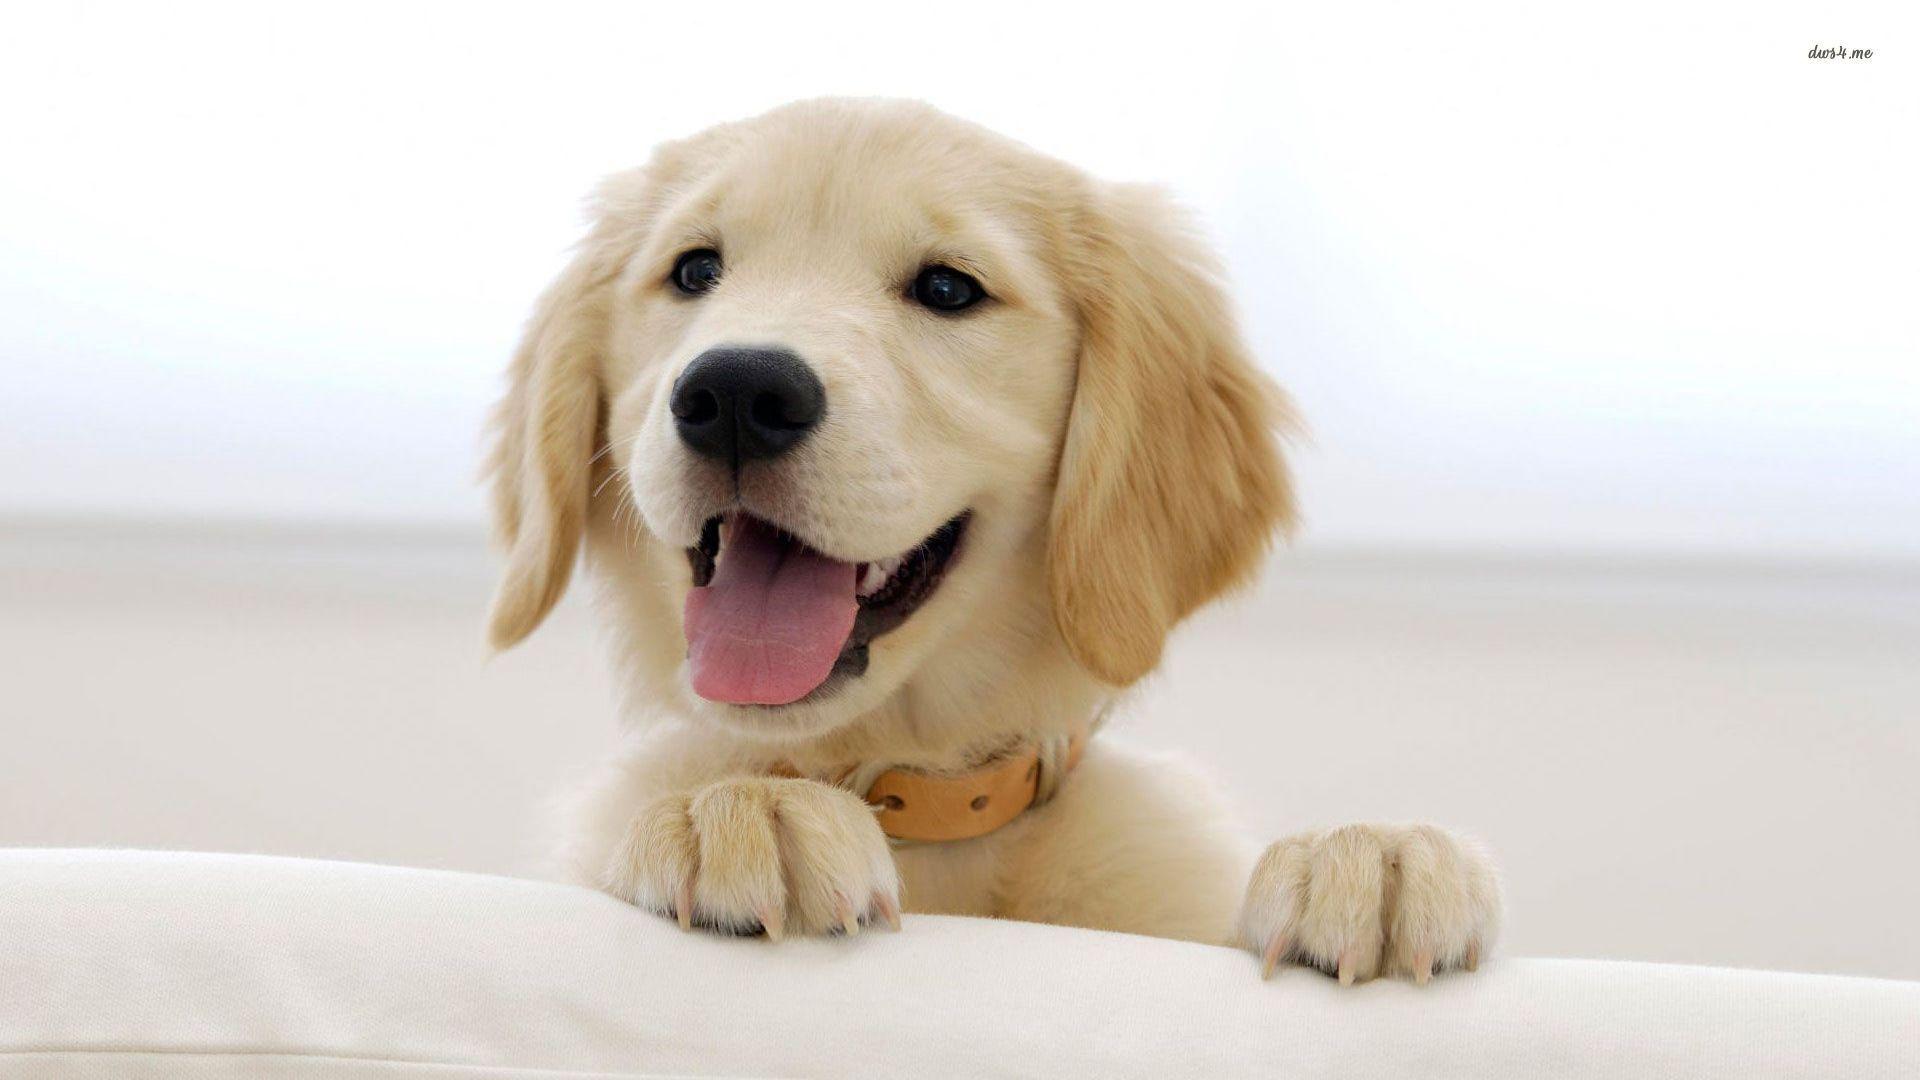 Smiling Dog Wallpapers Top Free Smiling Dog Backgrounds Wallpaperaccess